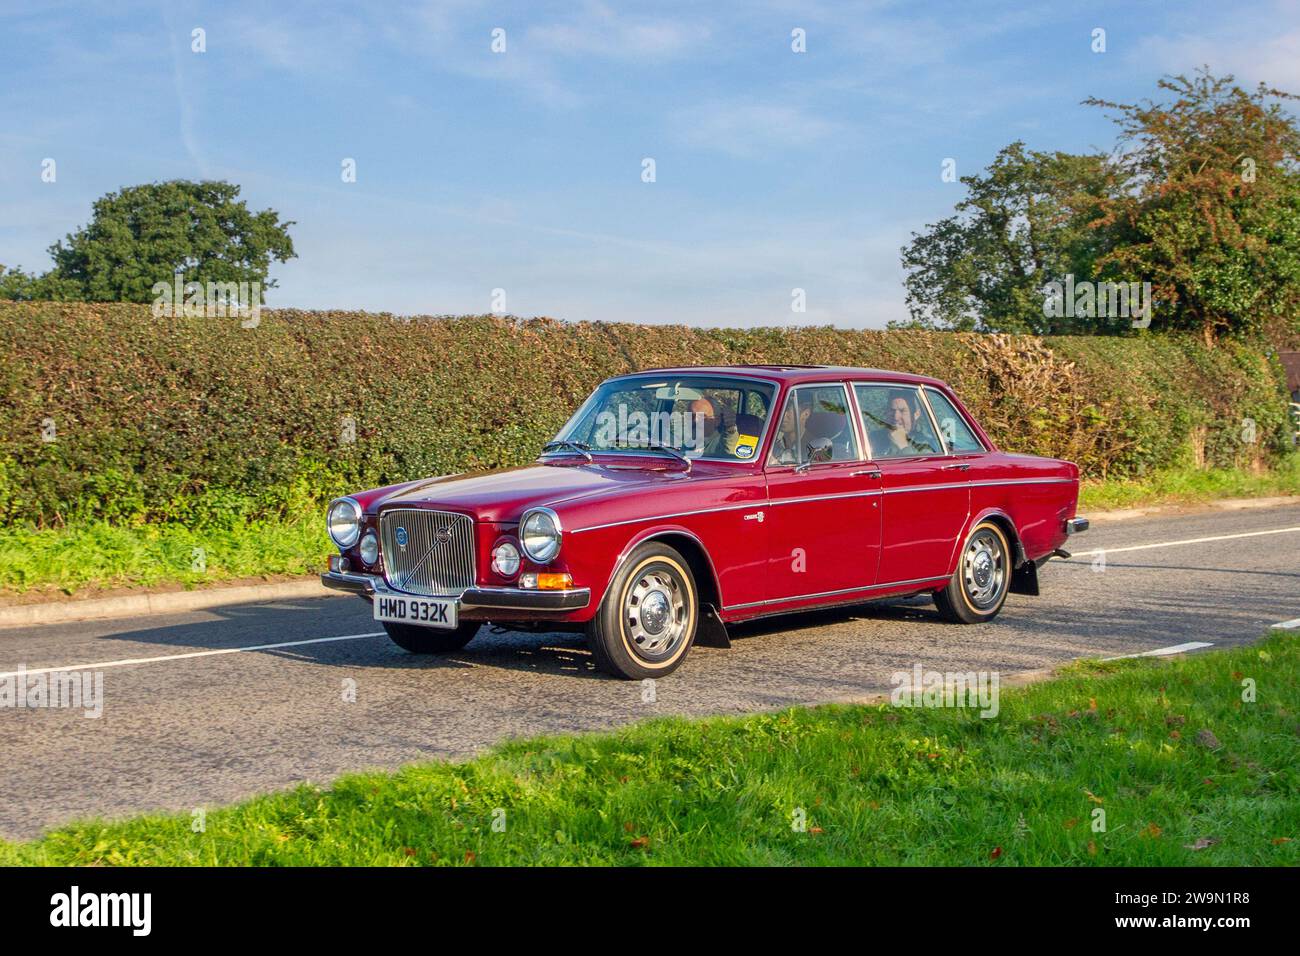 1971 70s seventies Volvo 164 Maroon Petrol 2978 cc, 4-door, 6-cylinder luxury sedan, 3.0 l. Cylinders. 6 Cyl ;  en-route to Capesthorne Hall classic August car show, Cheshire, UK Stock Photo